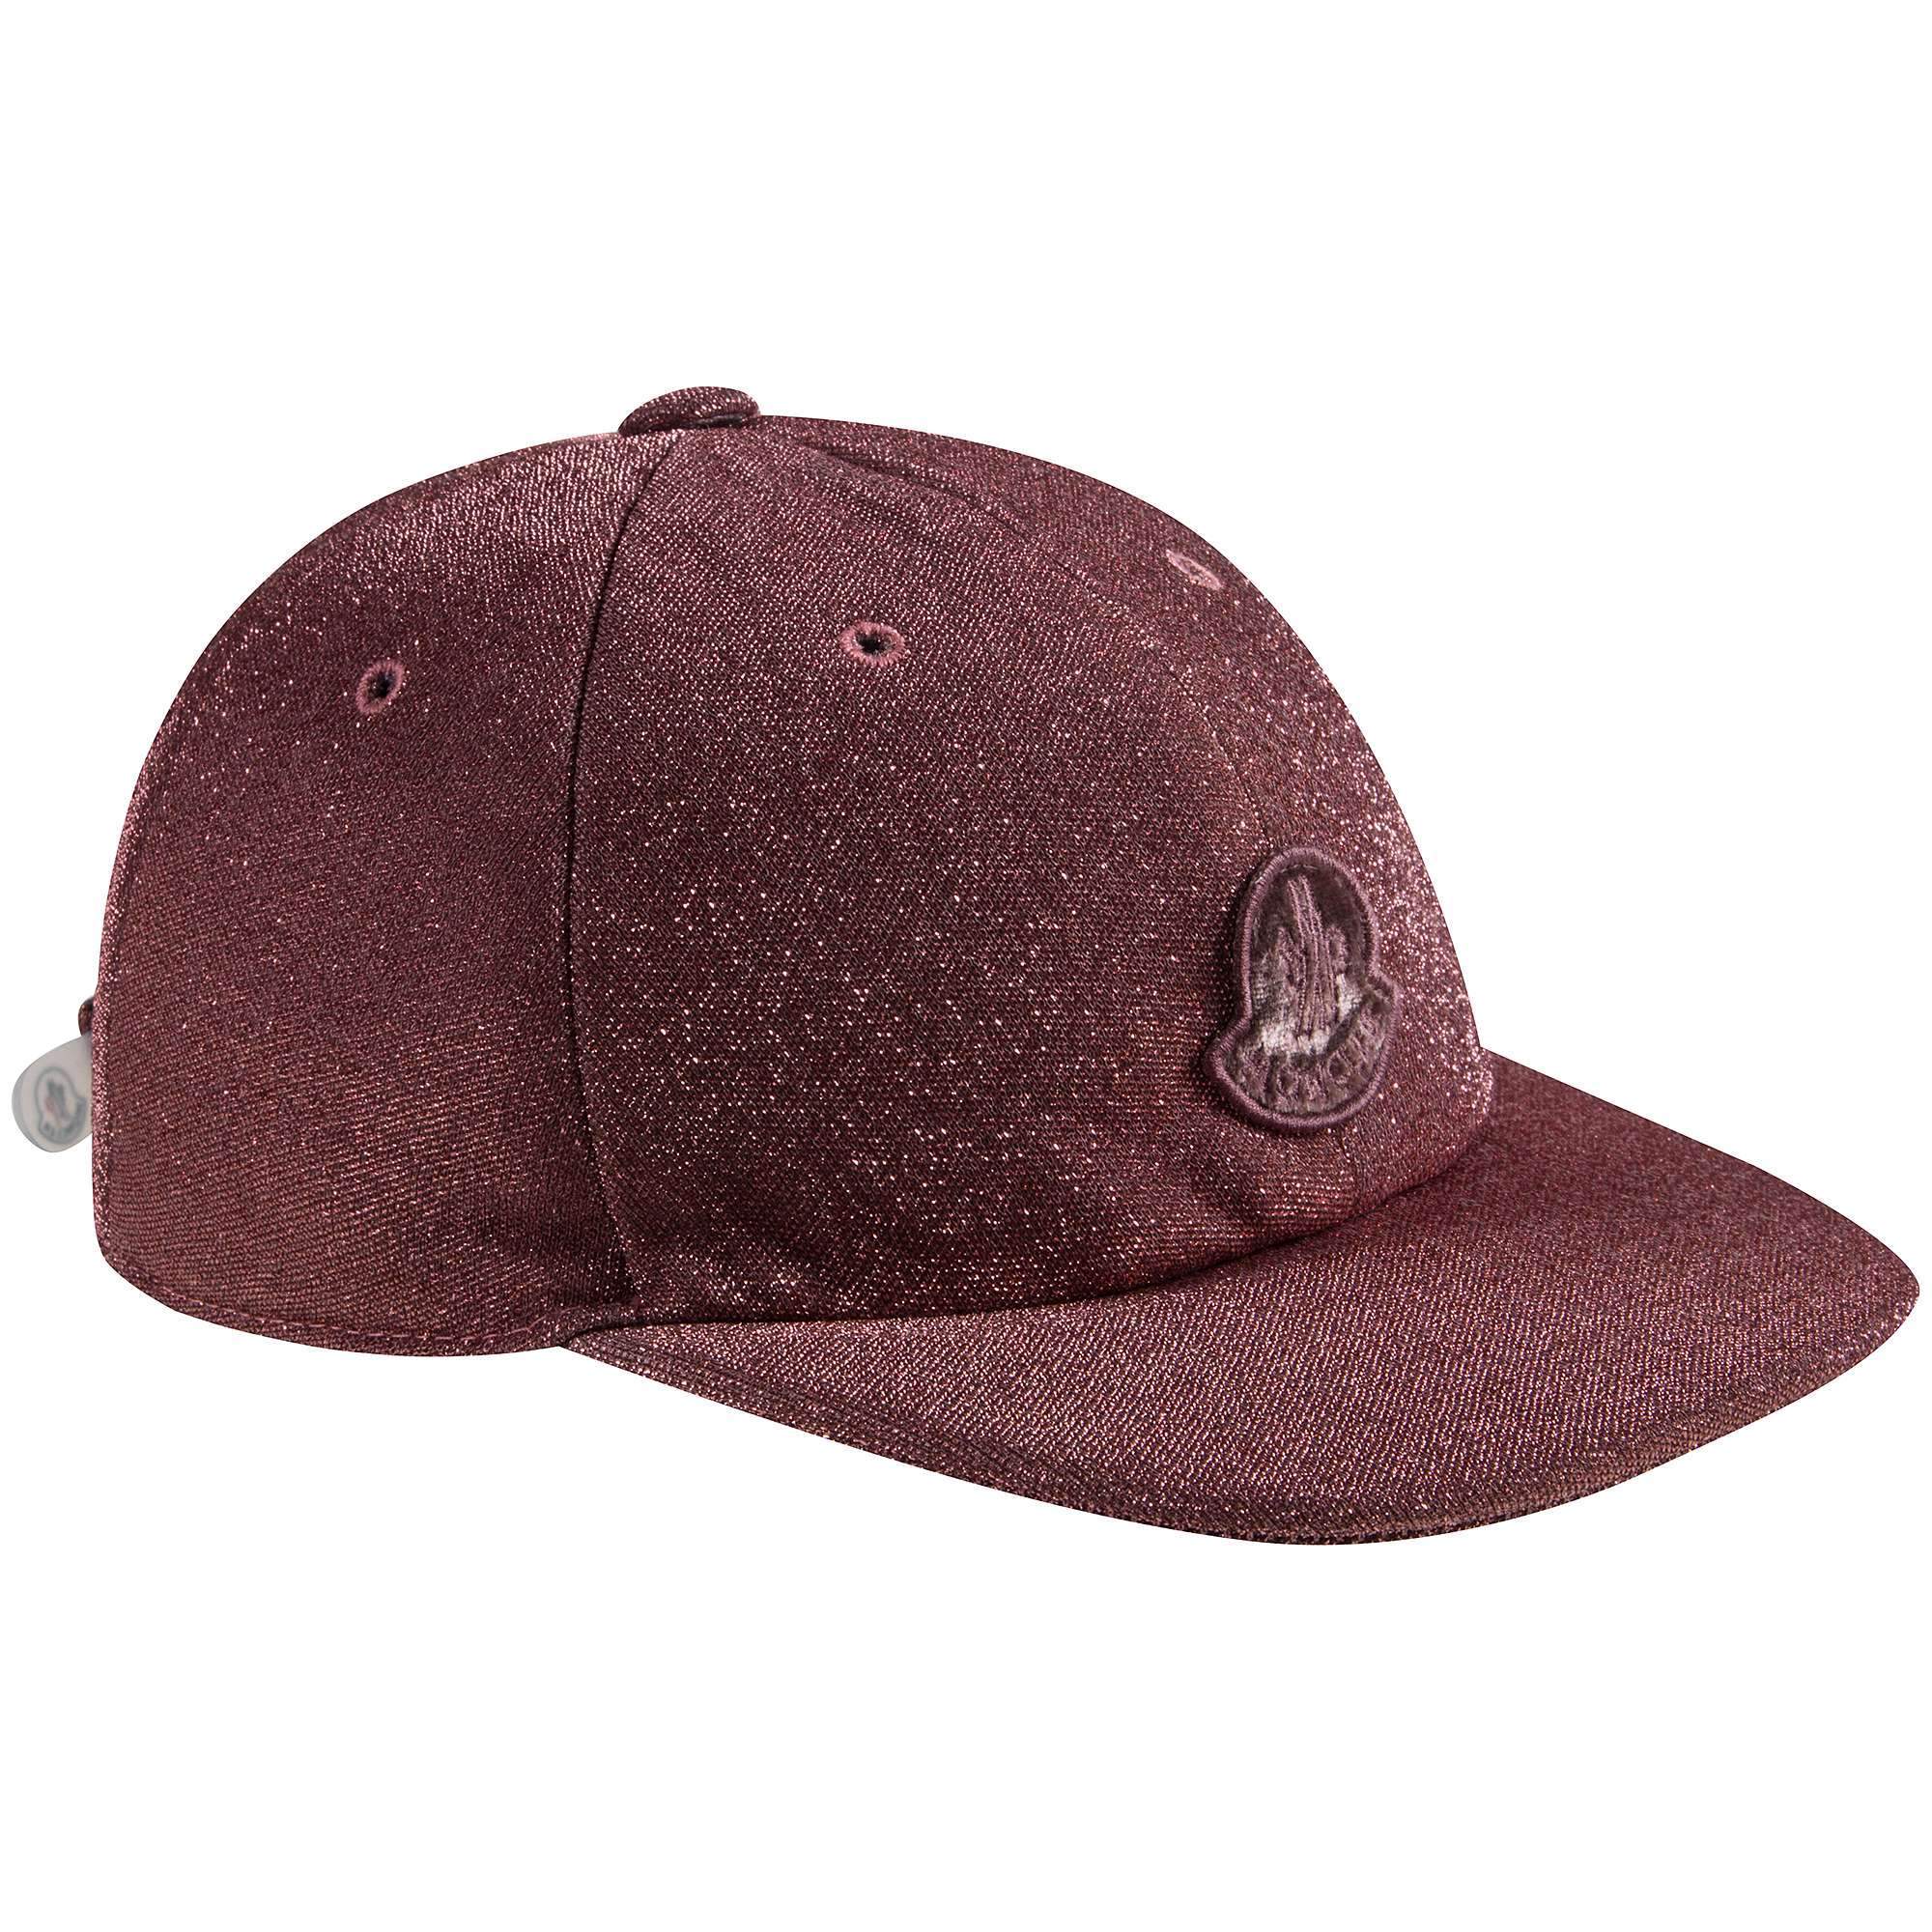 Boys Red "CAPPELLO" Hat